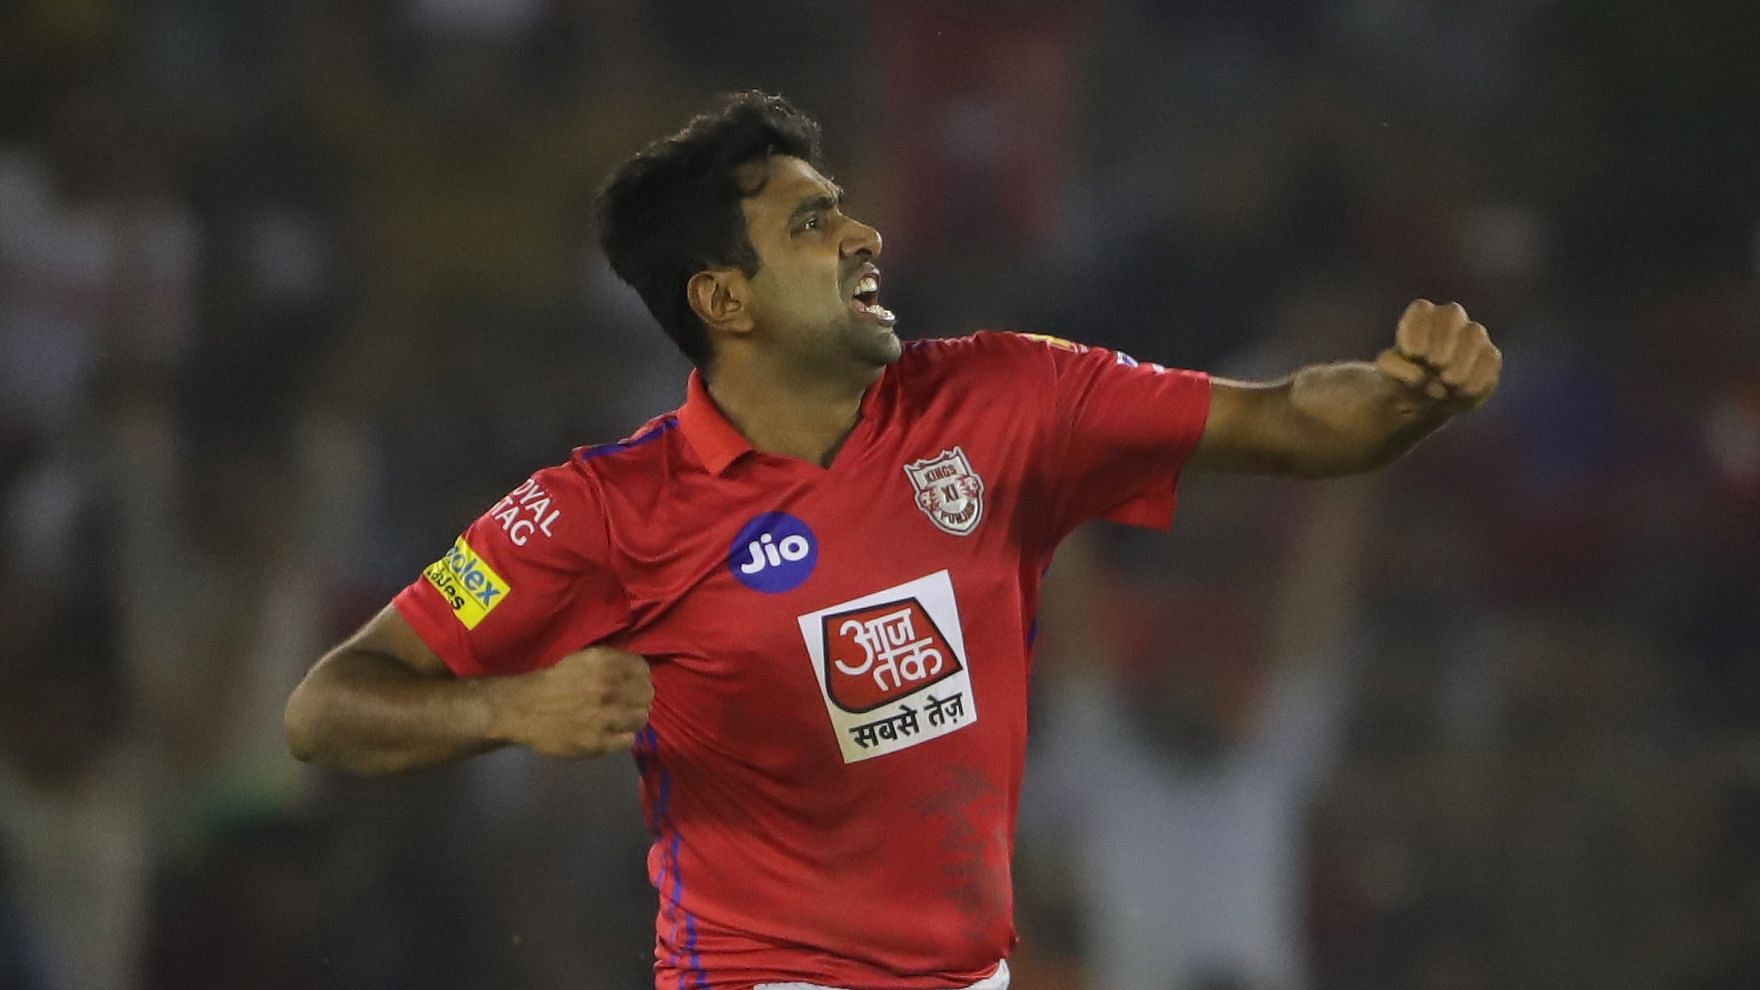 KXIP skipper was involved in yet another quick witted incident at the non striker’s end.